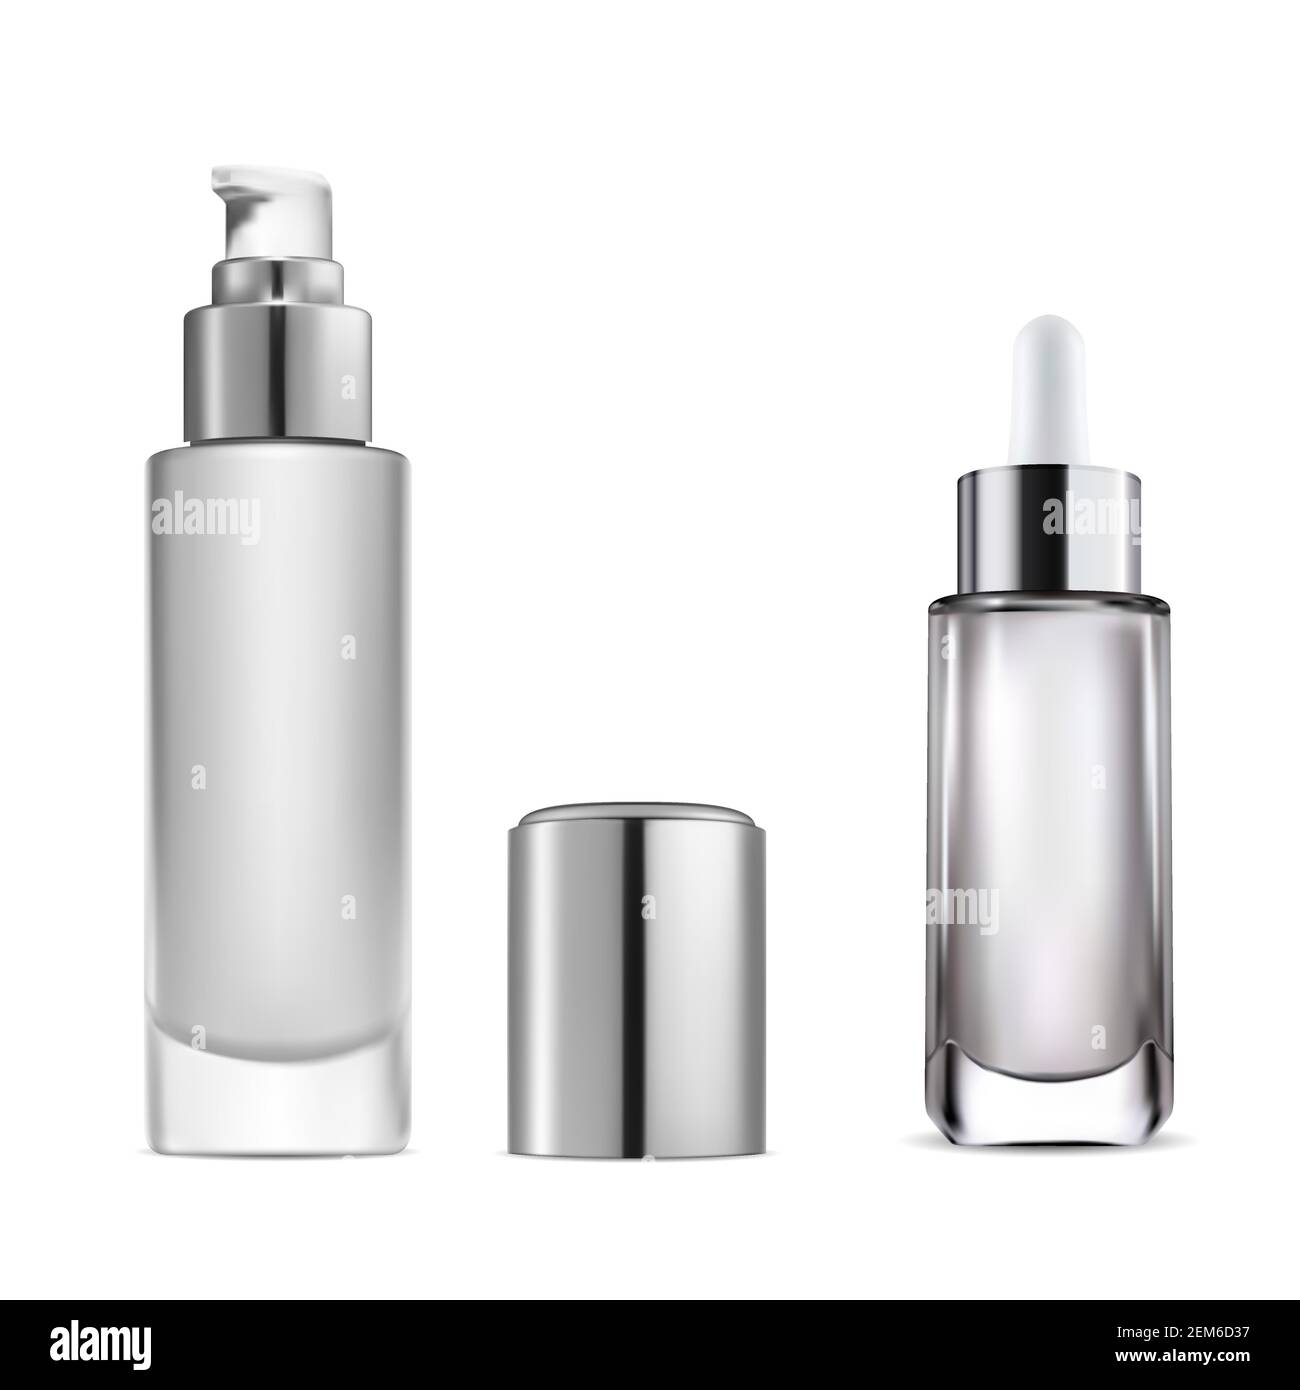 Cosmetic serum dropper bottle. Essential water pump bottle. Clear glass skincare flask with eyedropper. Collagen product dropper flacon illustration. Stock Vector